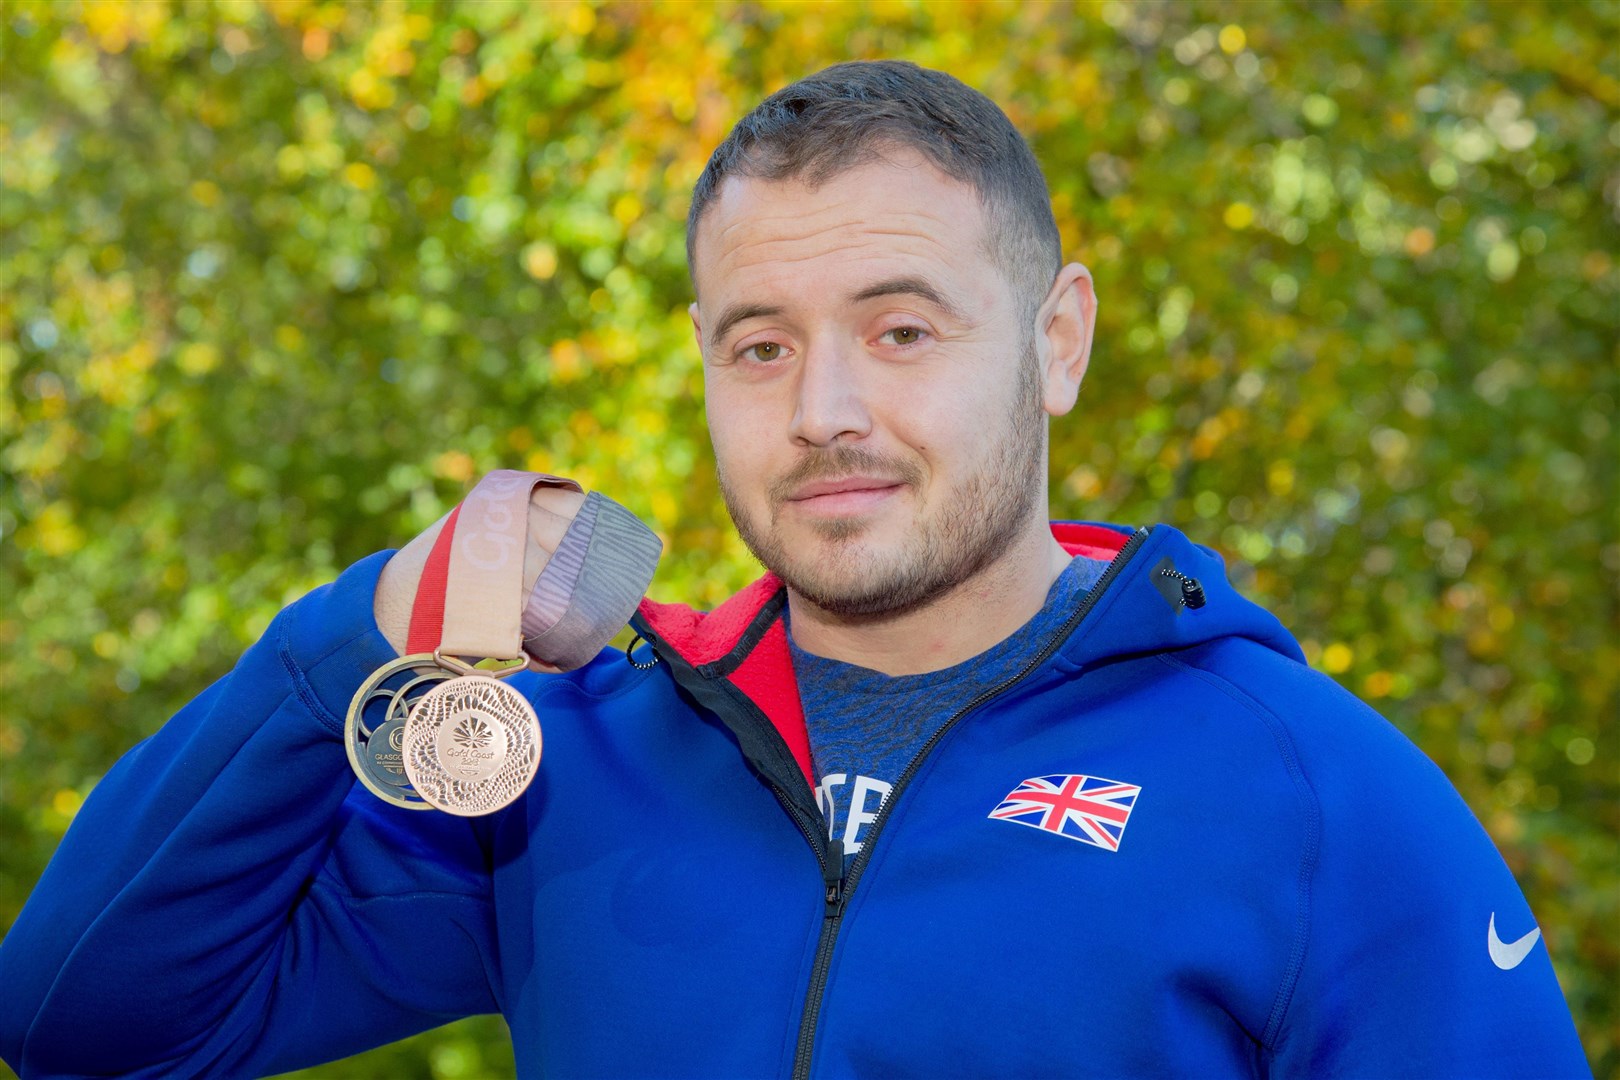 Double Commonwealth Games bronze winner Mark Dry with his medals, just prior to his ban in 2018. Photo: Daniel Forsyth